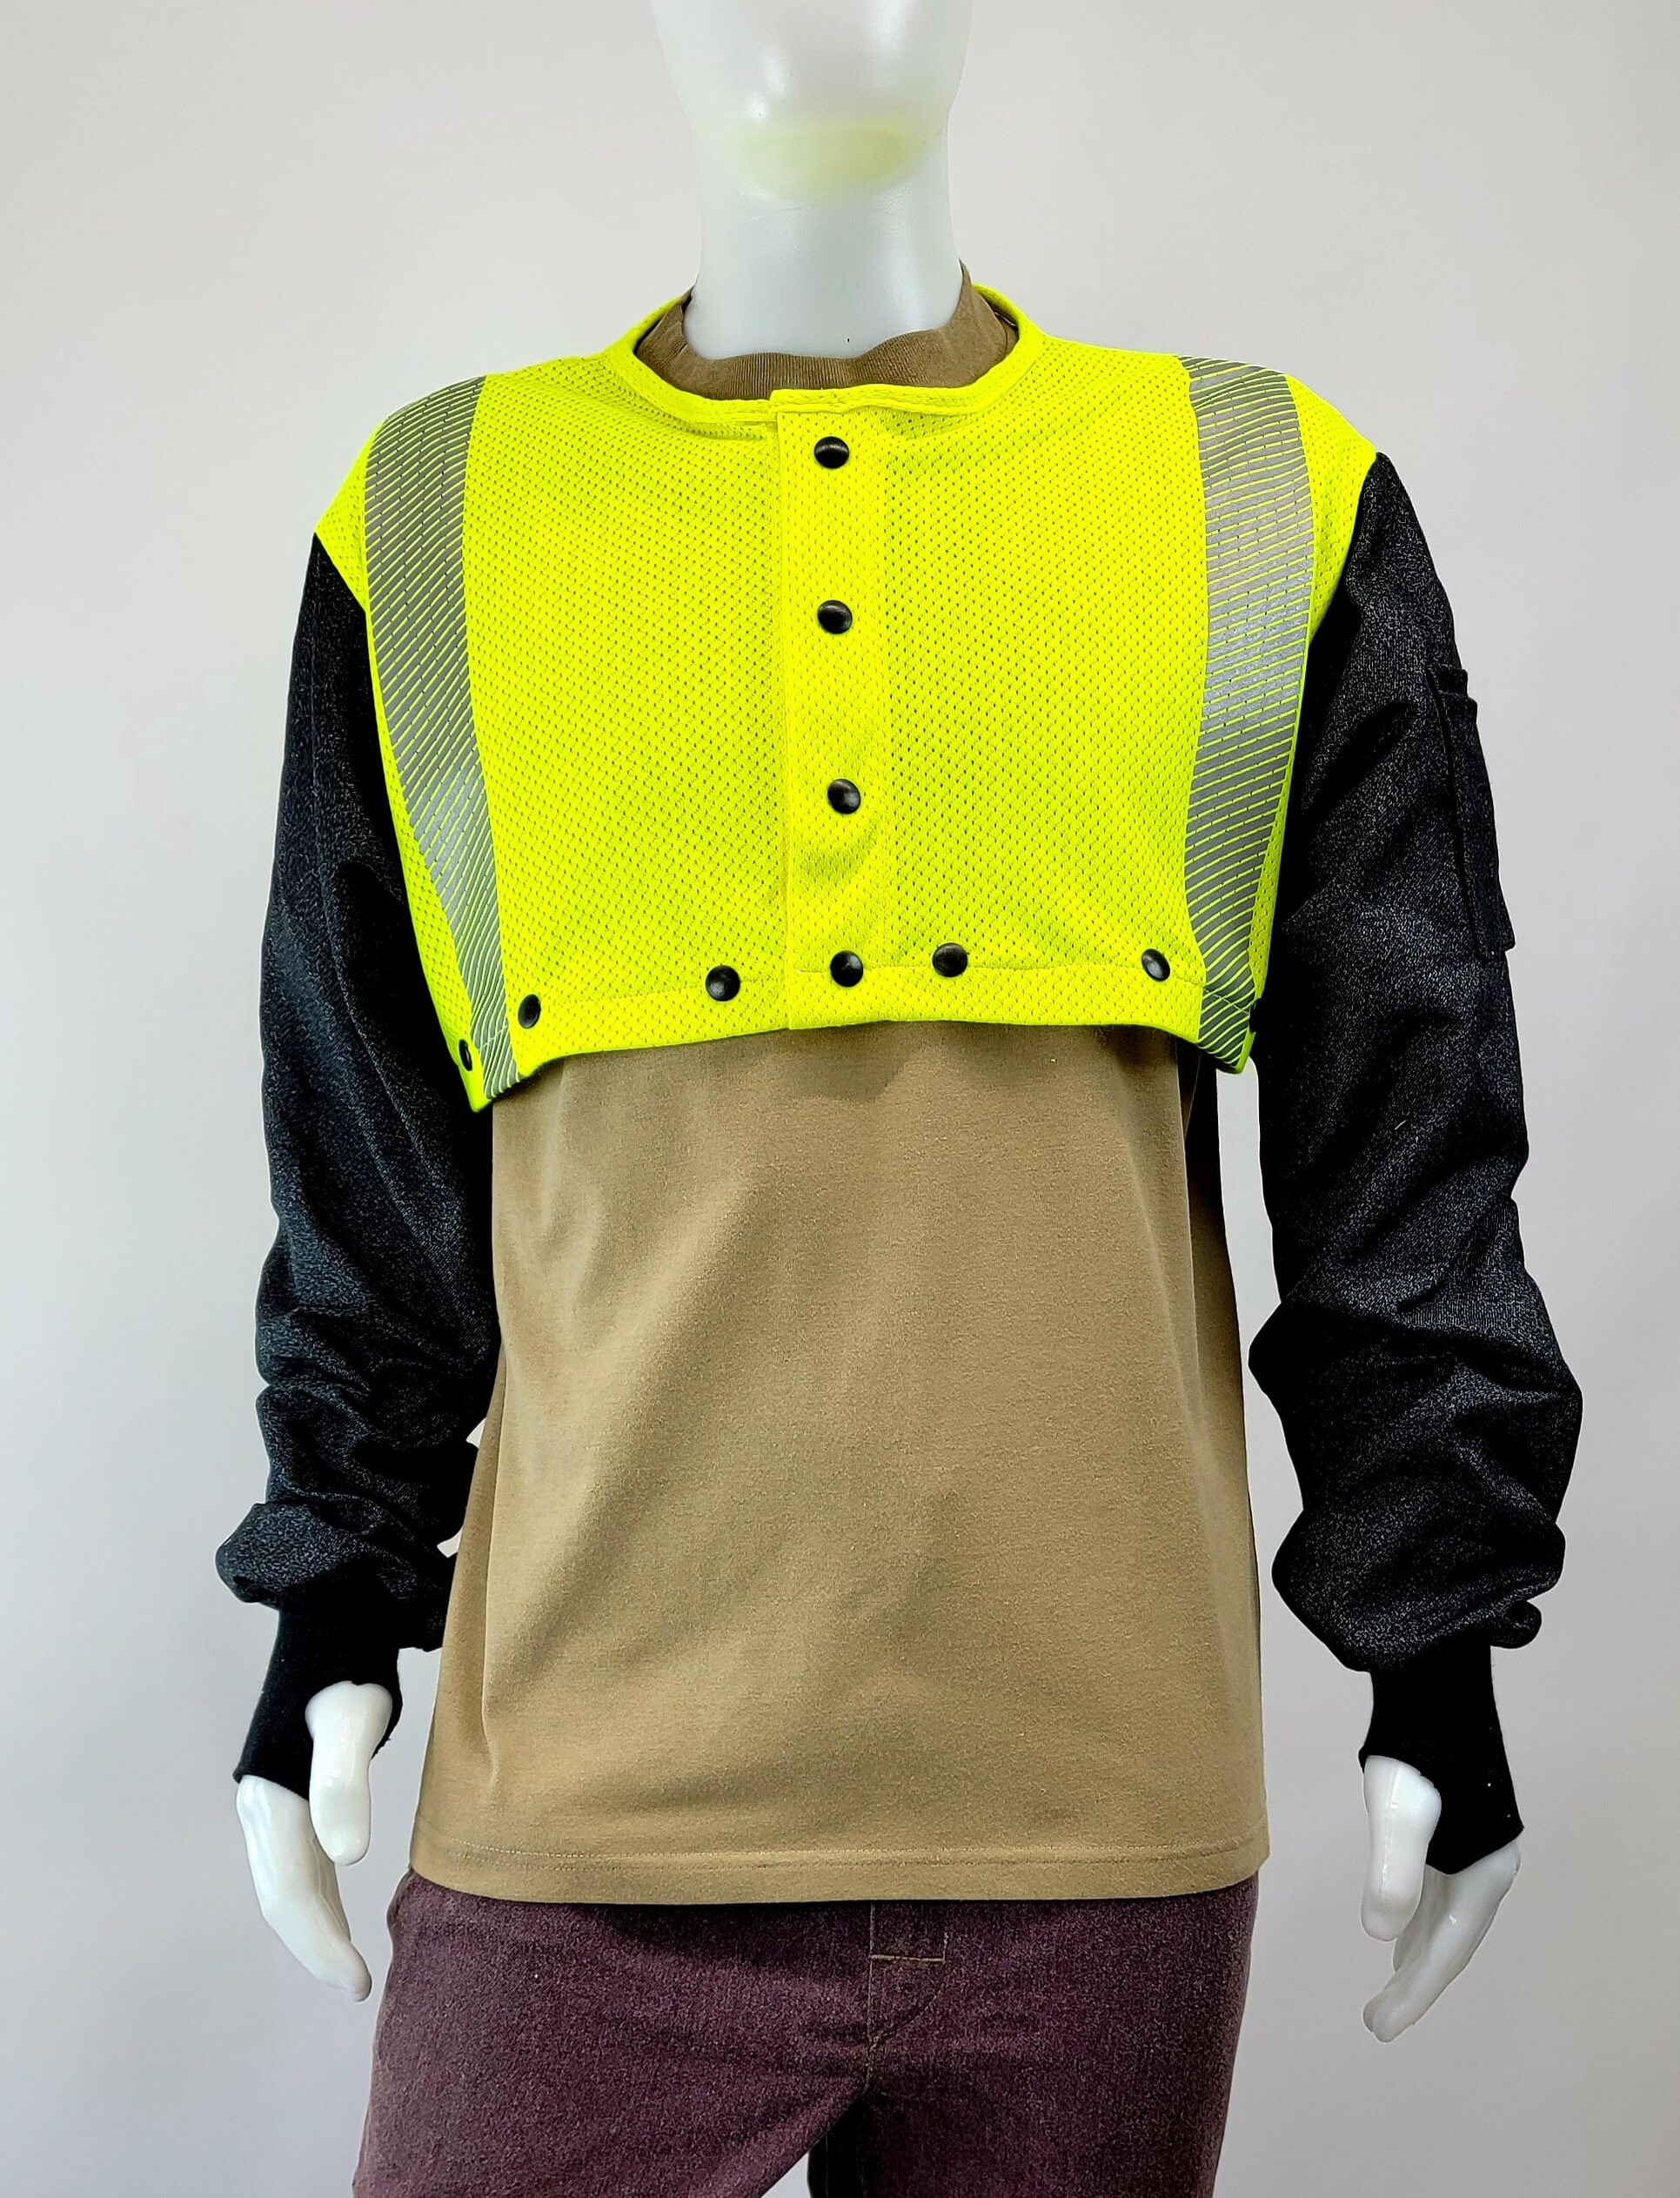 Stamping & Pressing Safety Apparel